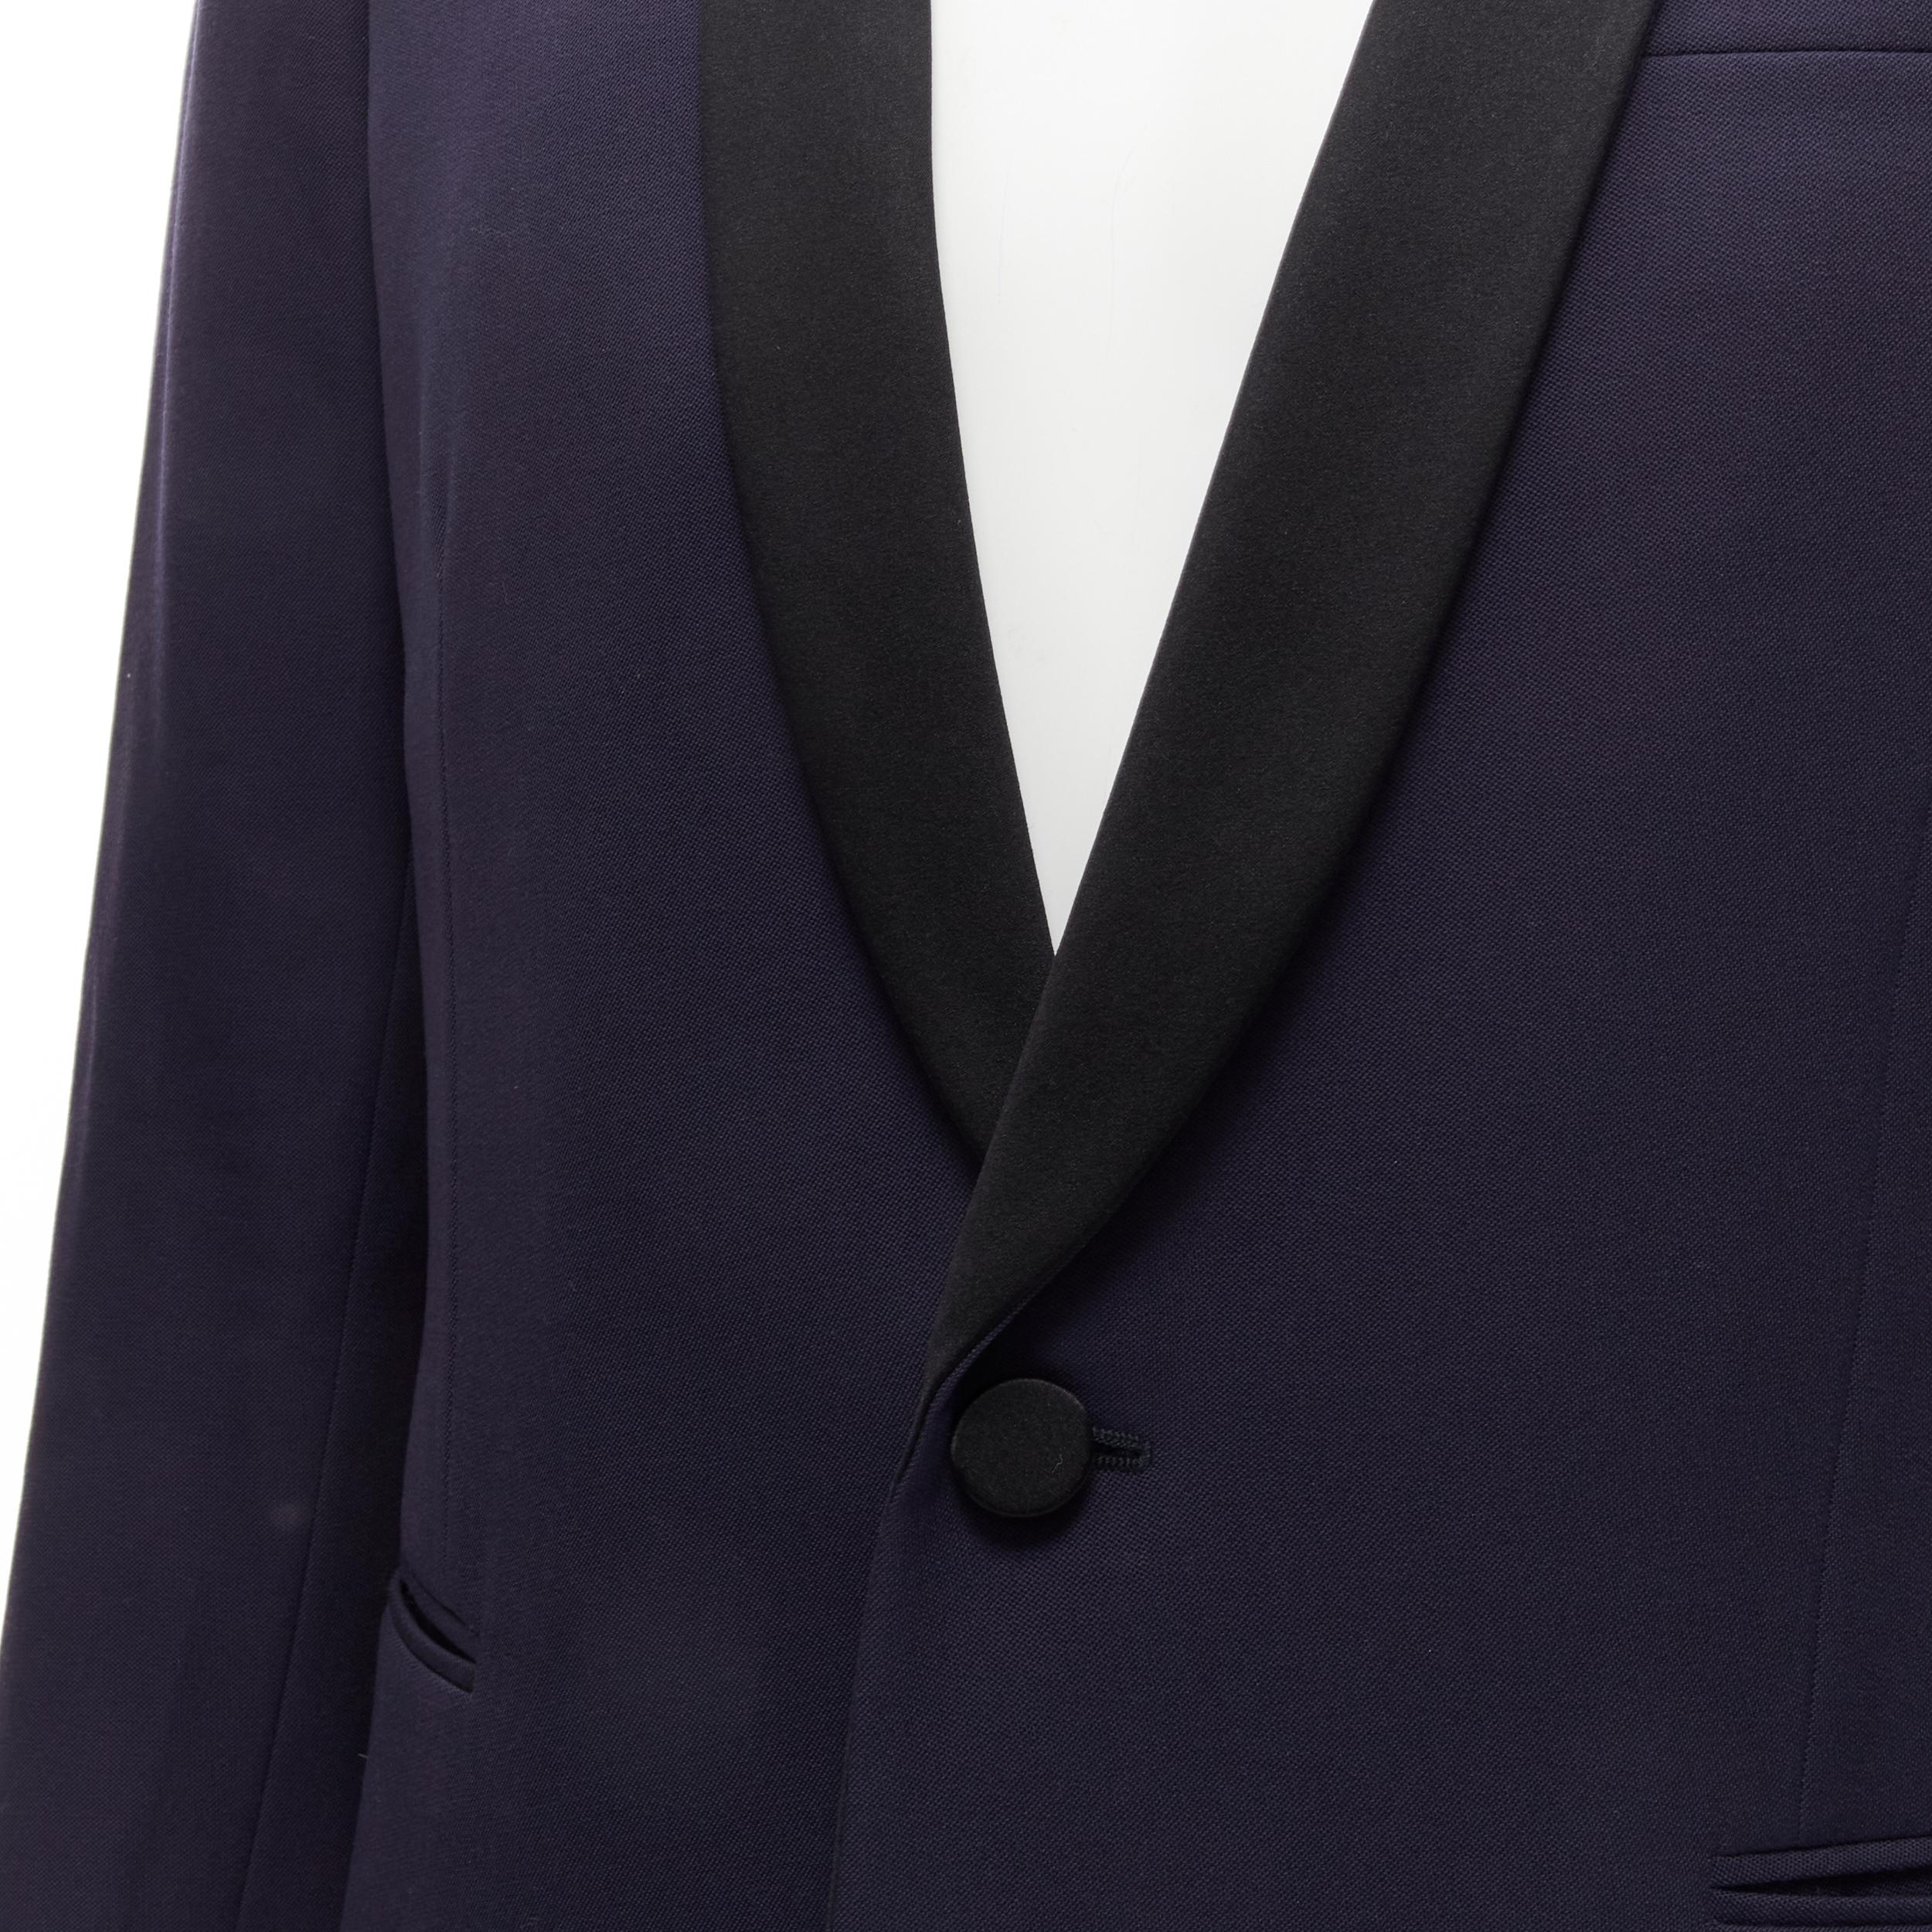 SAINT LAURENT virgin wool navy classic satin shawl collar tux blazer suit EU50 L
Reference: YNWG/A00091
Brand: Saint Laurent
Material: Virgin Wool
Color: Navy, Black
Pattern: Solid
Closure: Button
Lining: Fabric
Extra Details: Single button closure.